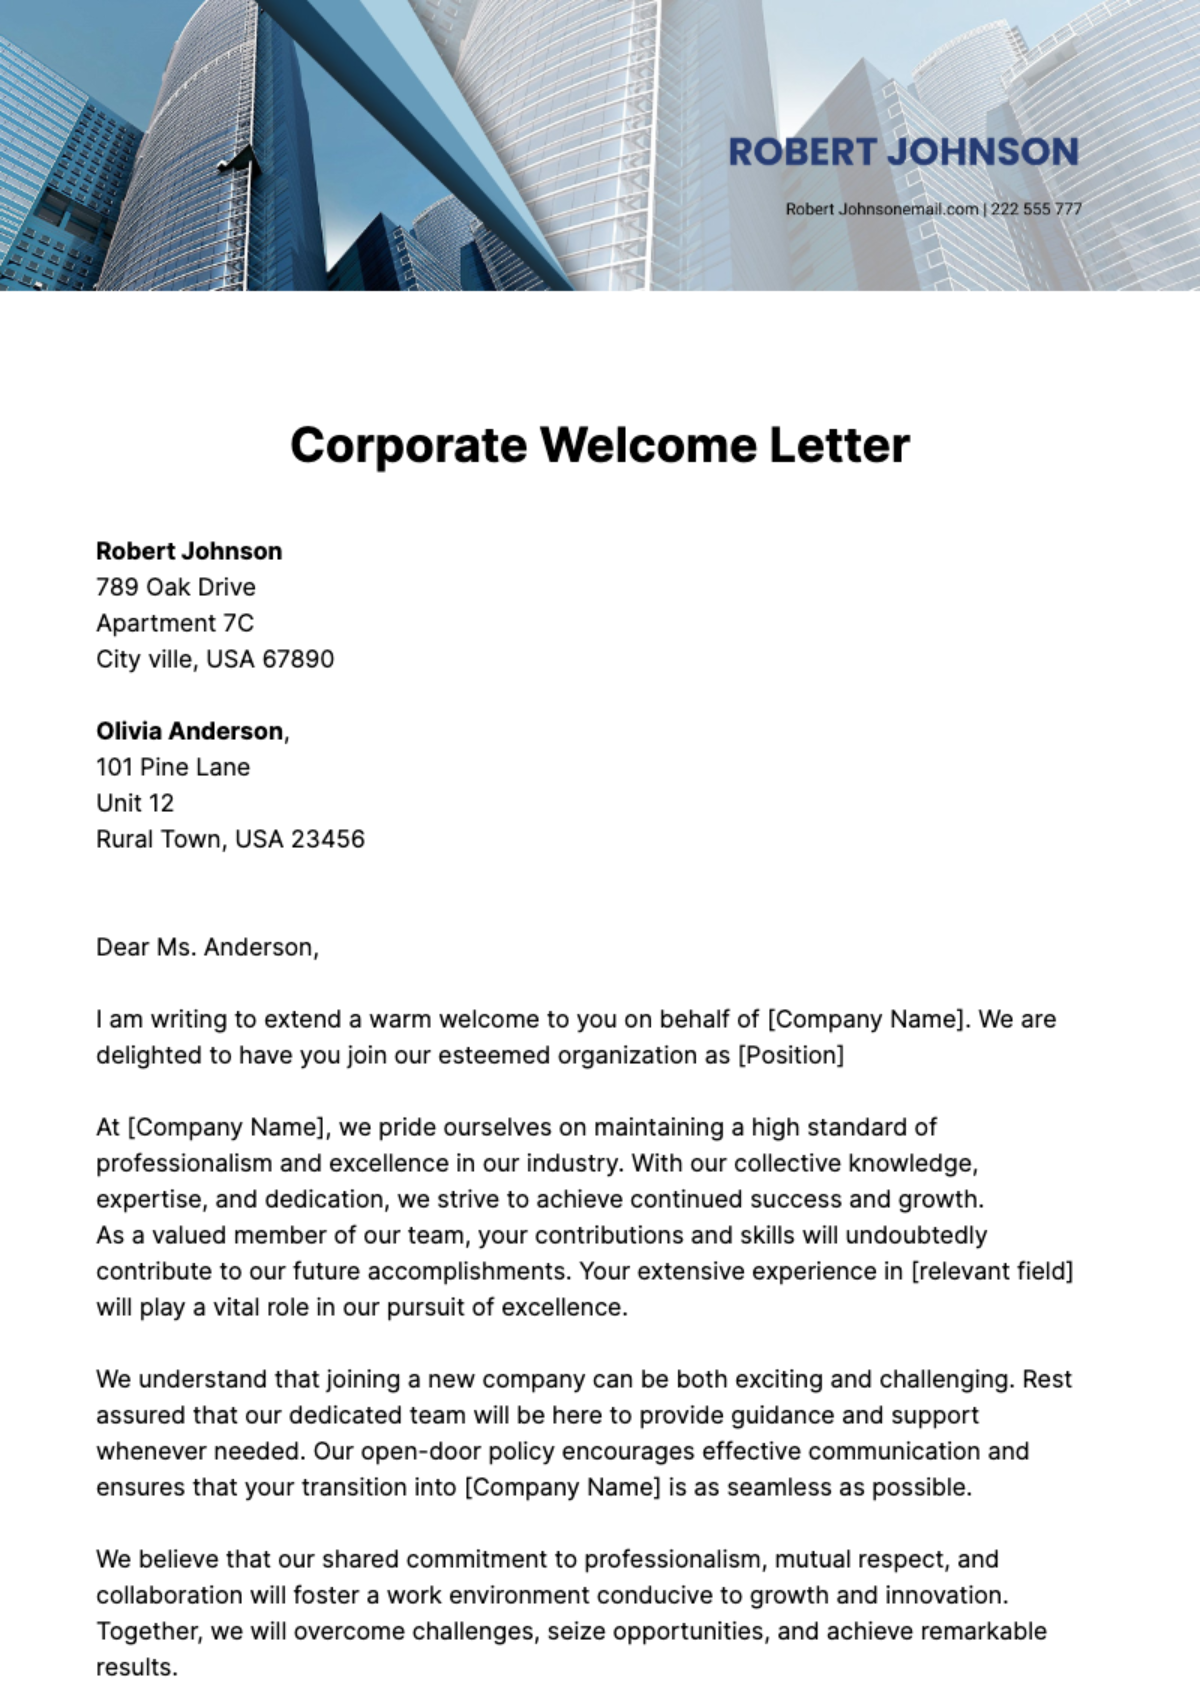 Free Corporate Welcome Letter Template